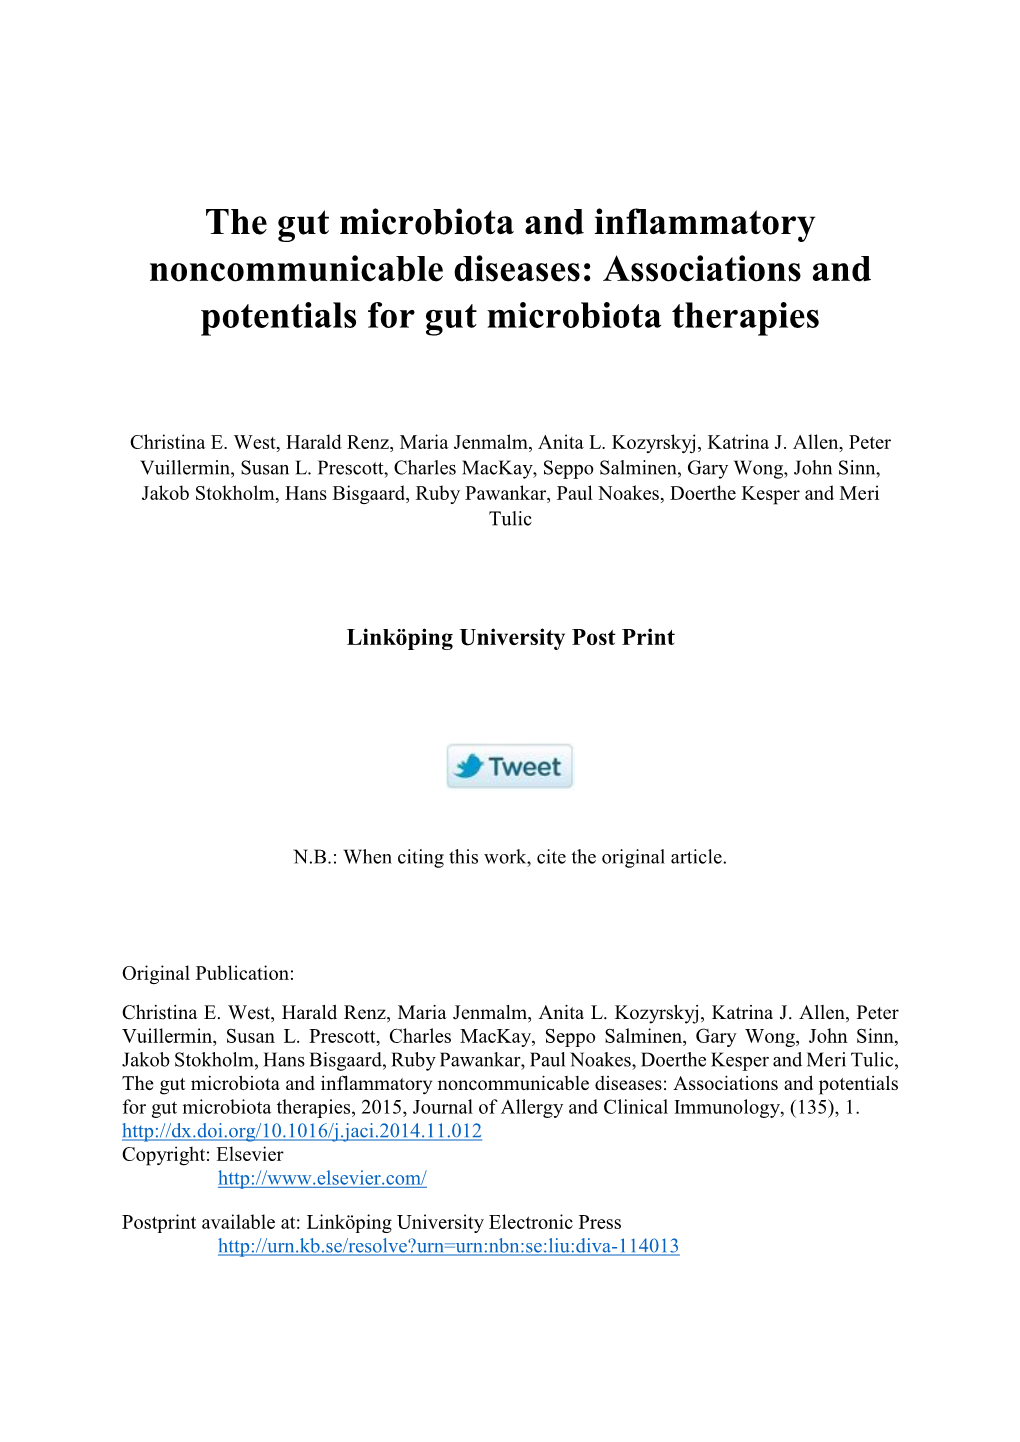 The Gut Microbiota and Inflammatory Noncommunicable Diseases: Associations and Potentials for Gut Microbiota Therapies